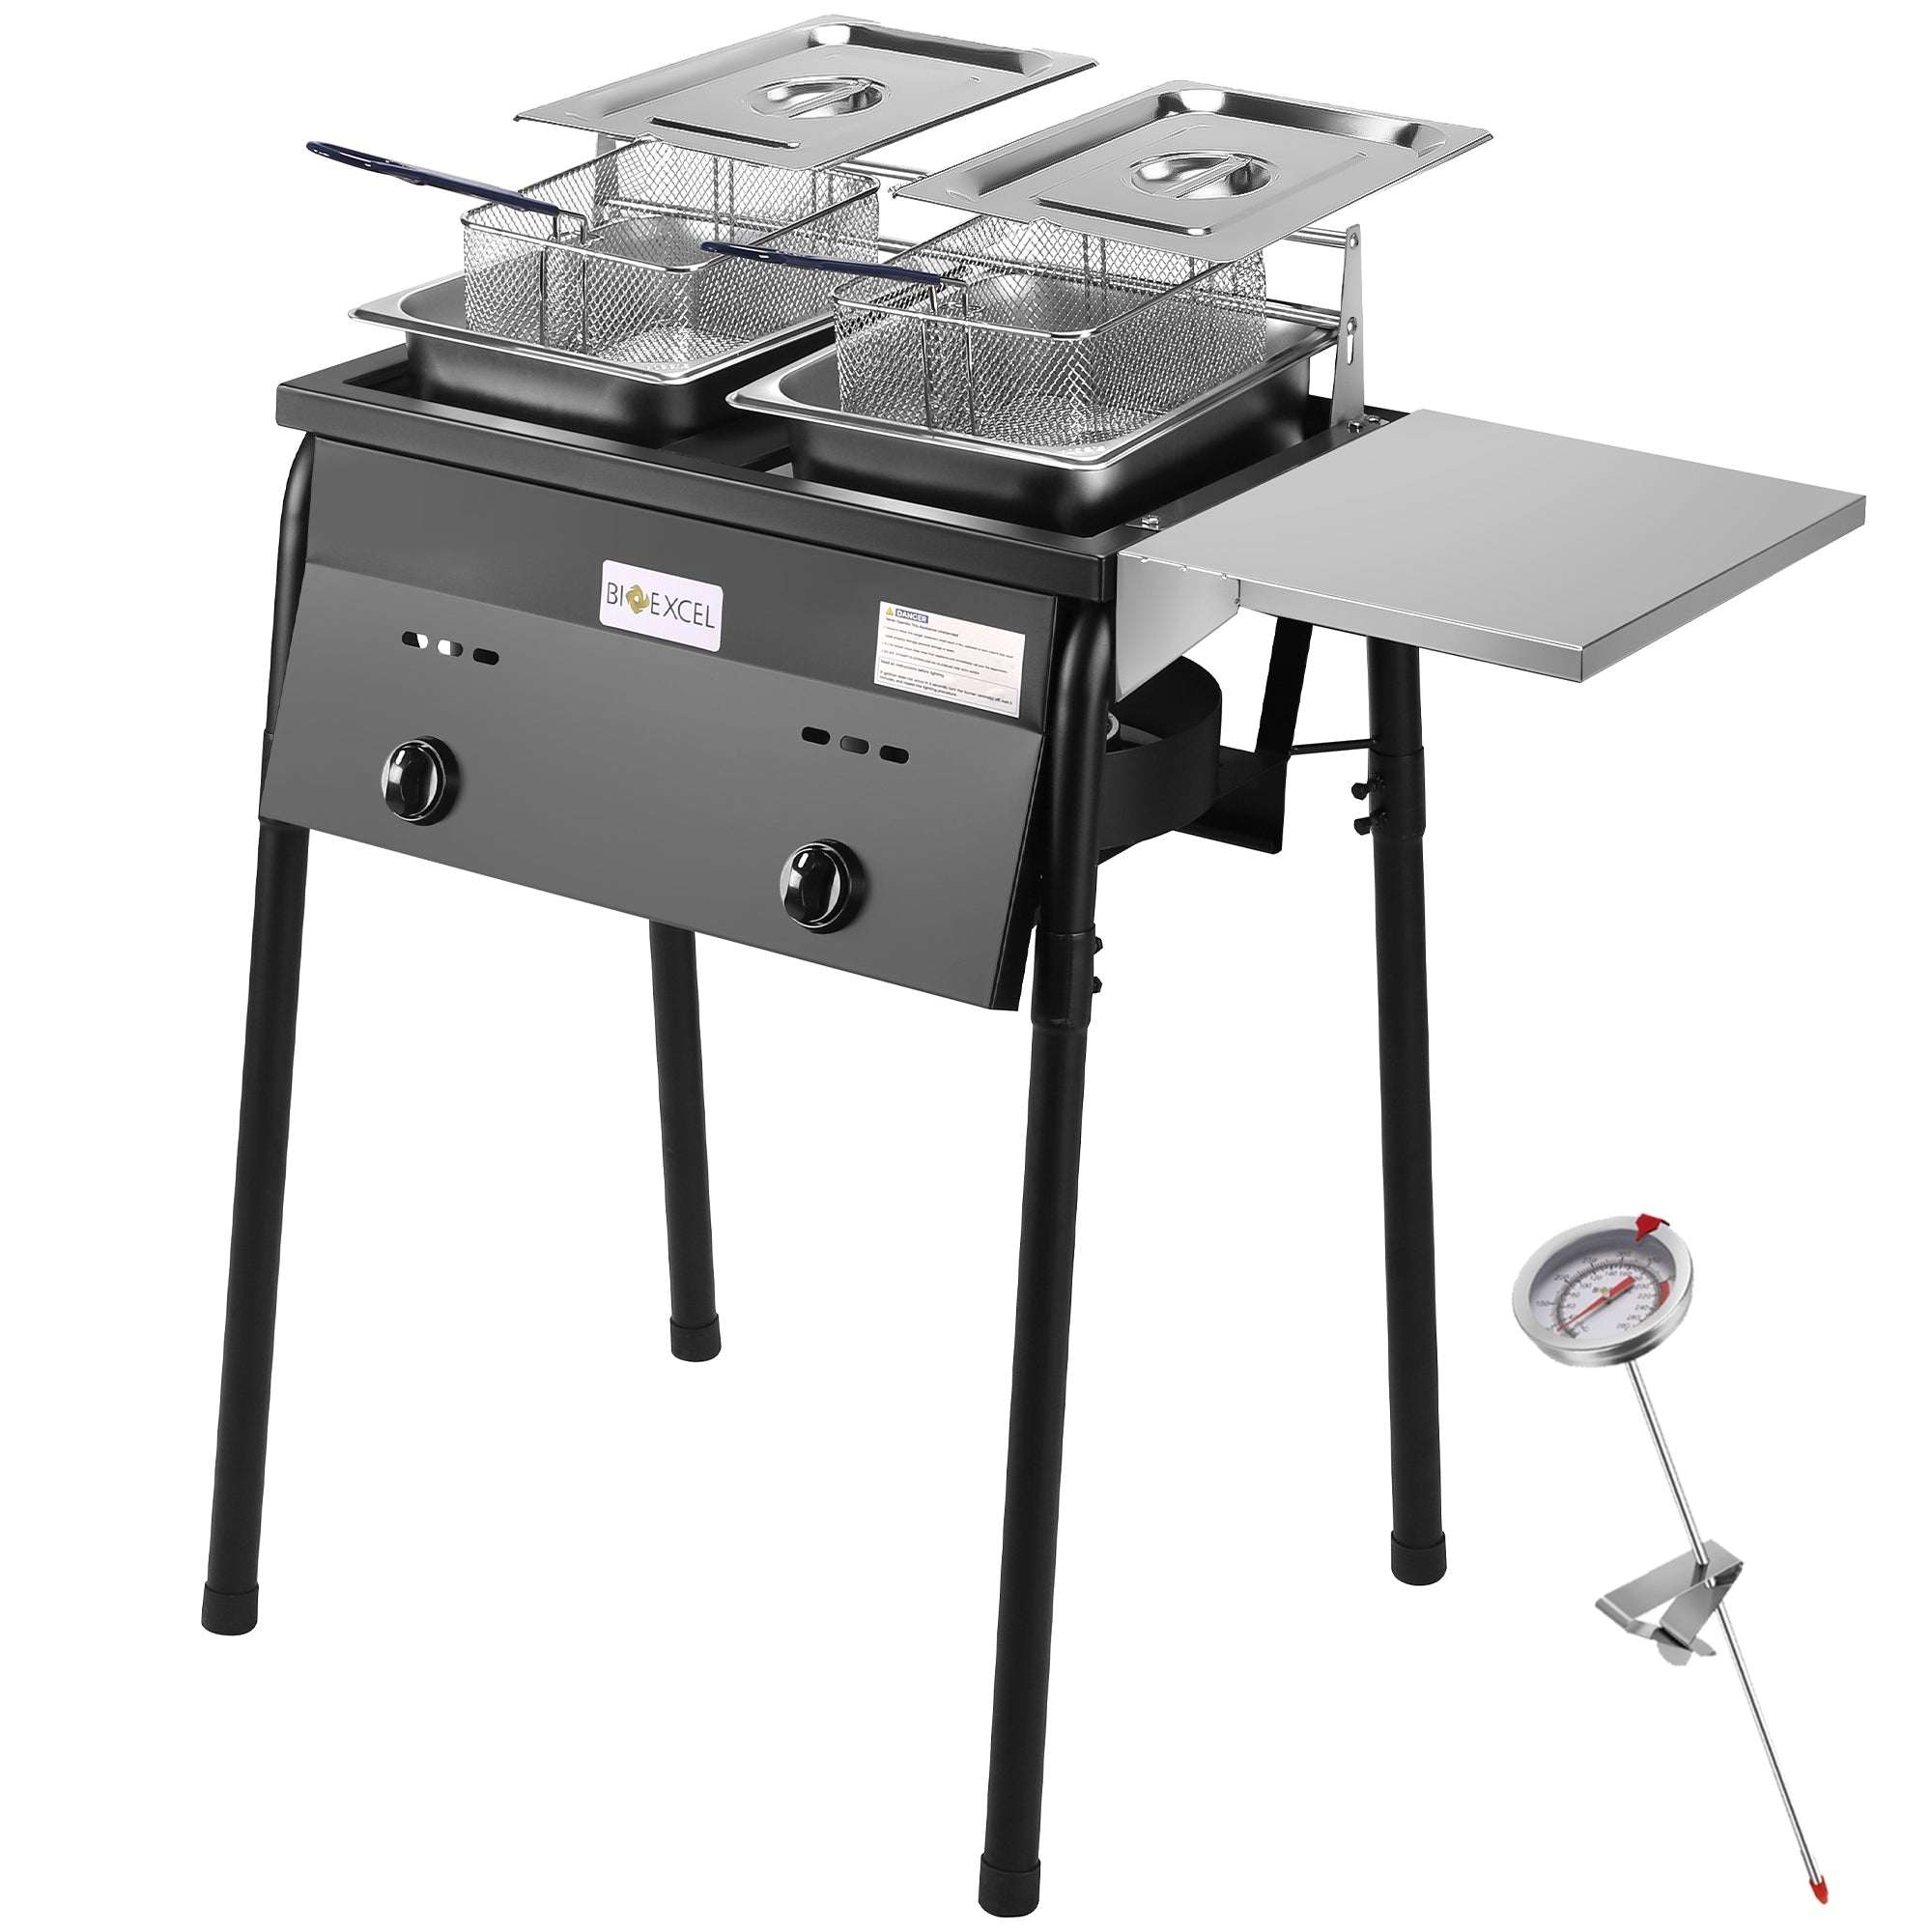 bioexcel-cast-iron-deep-fryer-with-2-stainless-baskets-and-steel-oil-tank